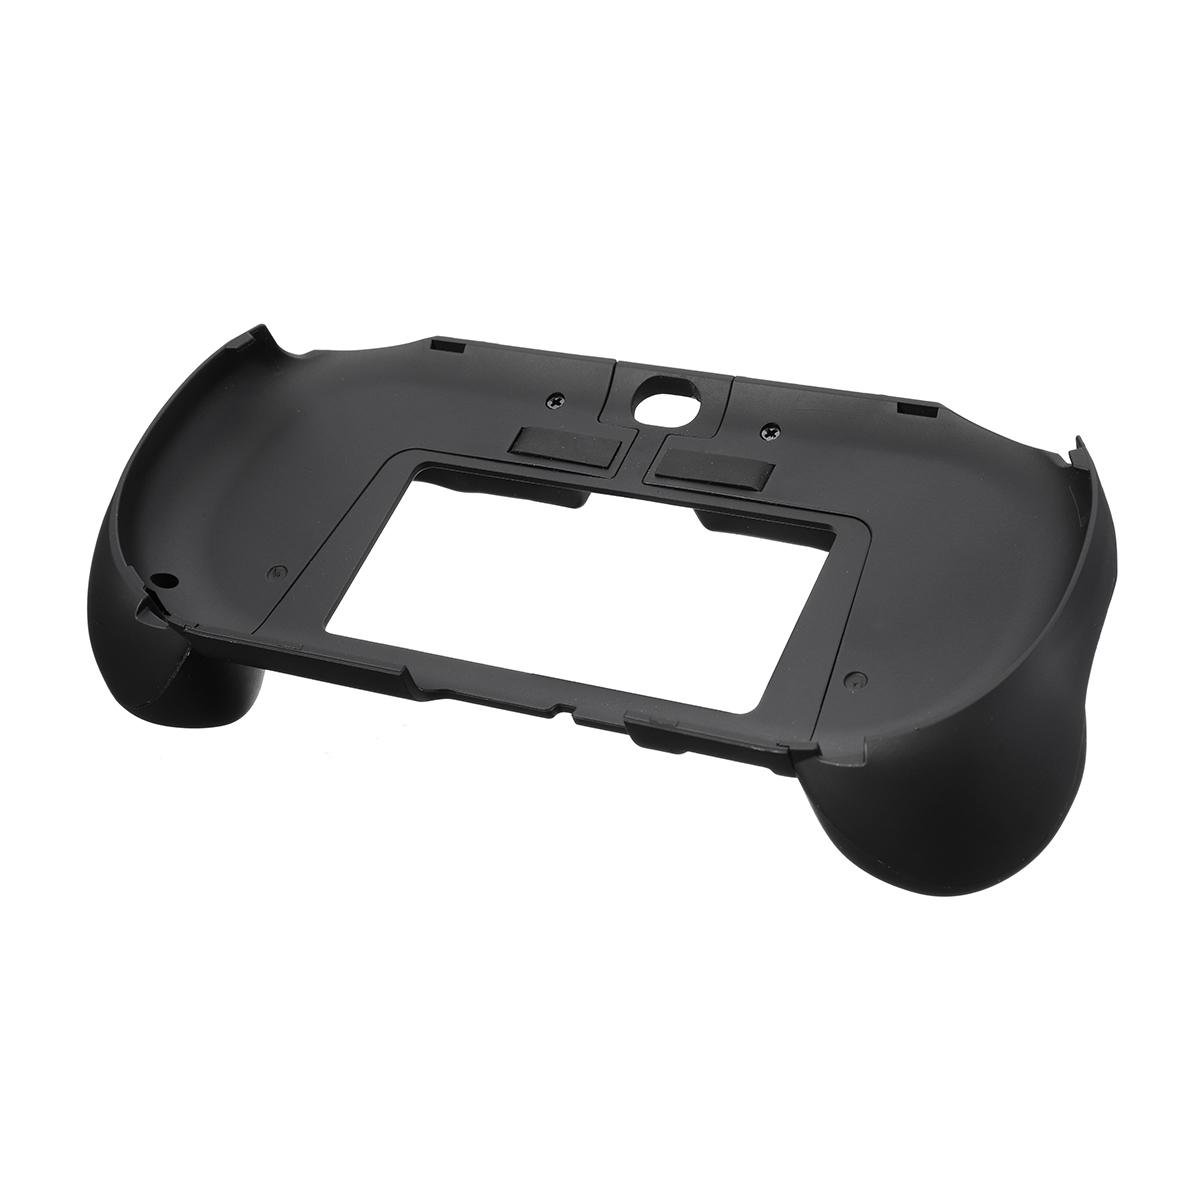 L2 R2 Trigger Grips Handle Shell Protective Case for Sony PlayStation PS Vita 2000 Game Console 23